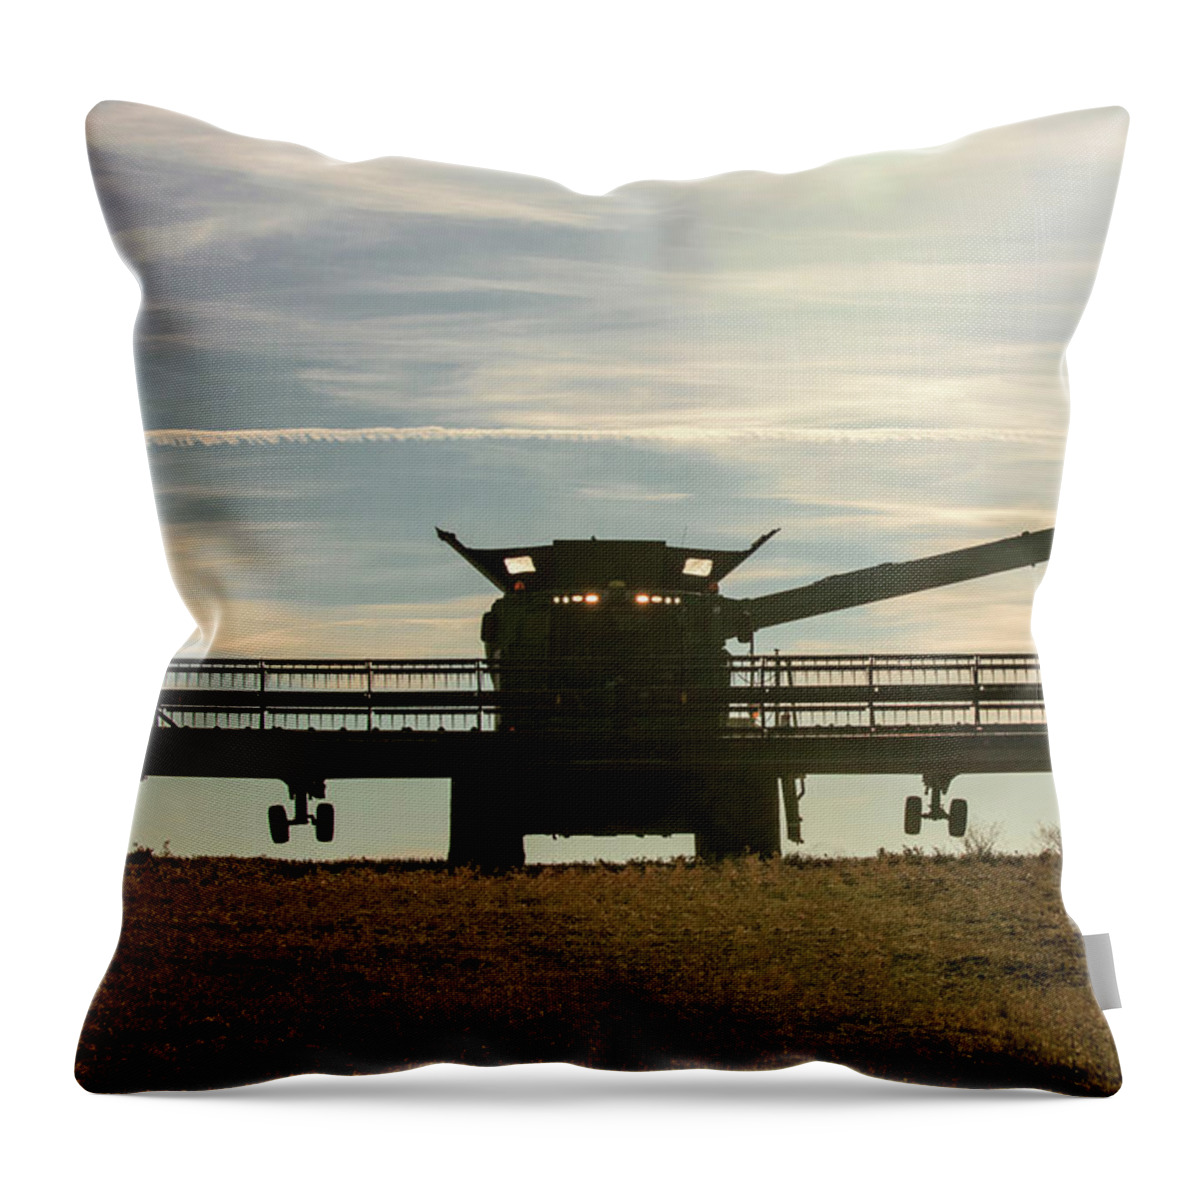 Chickpeas Throw Pillow featuring the photograph Chickpea Silhouette by Todd Klassy